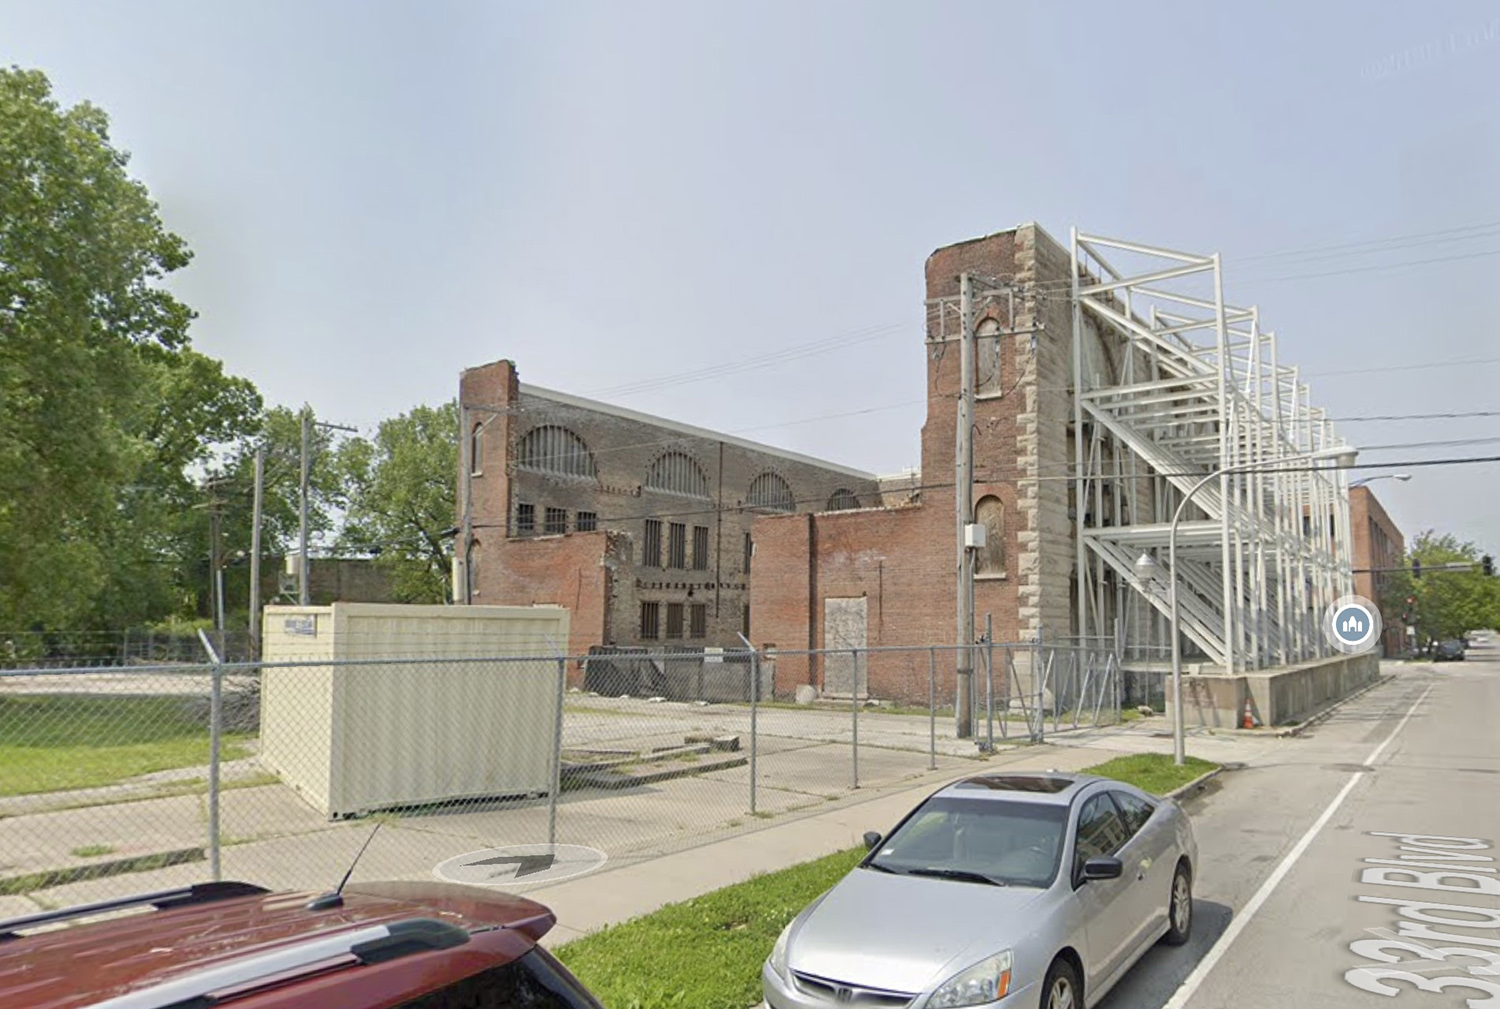 View of East Wall Before Collapse at Pilgrim Baptist Church via Google Maps